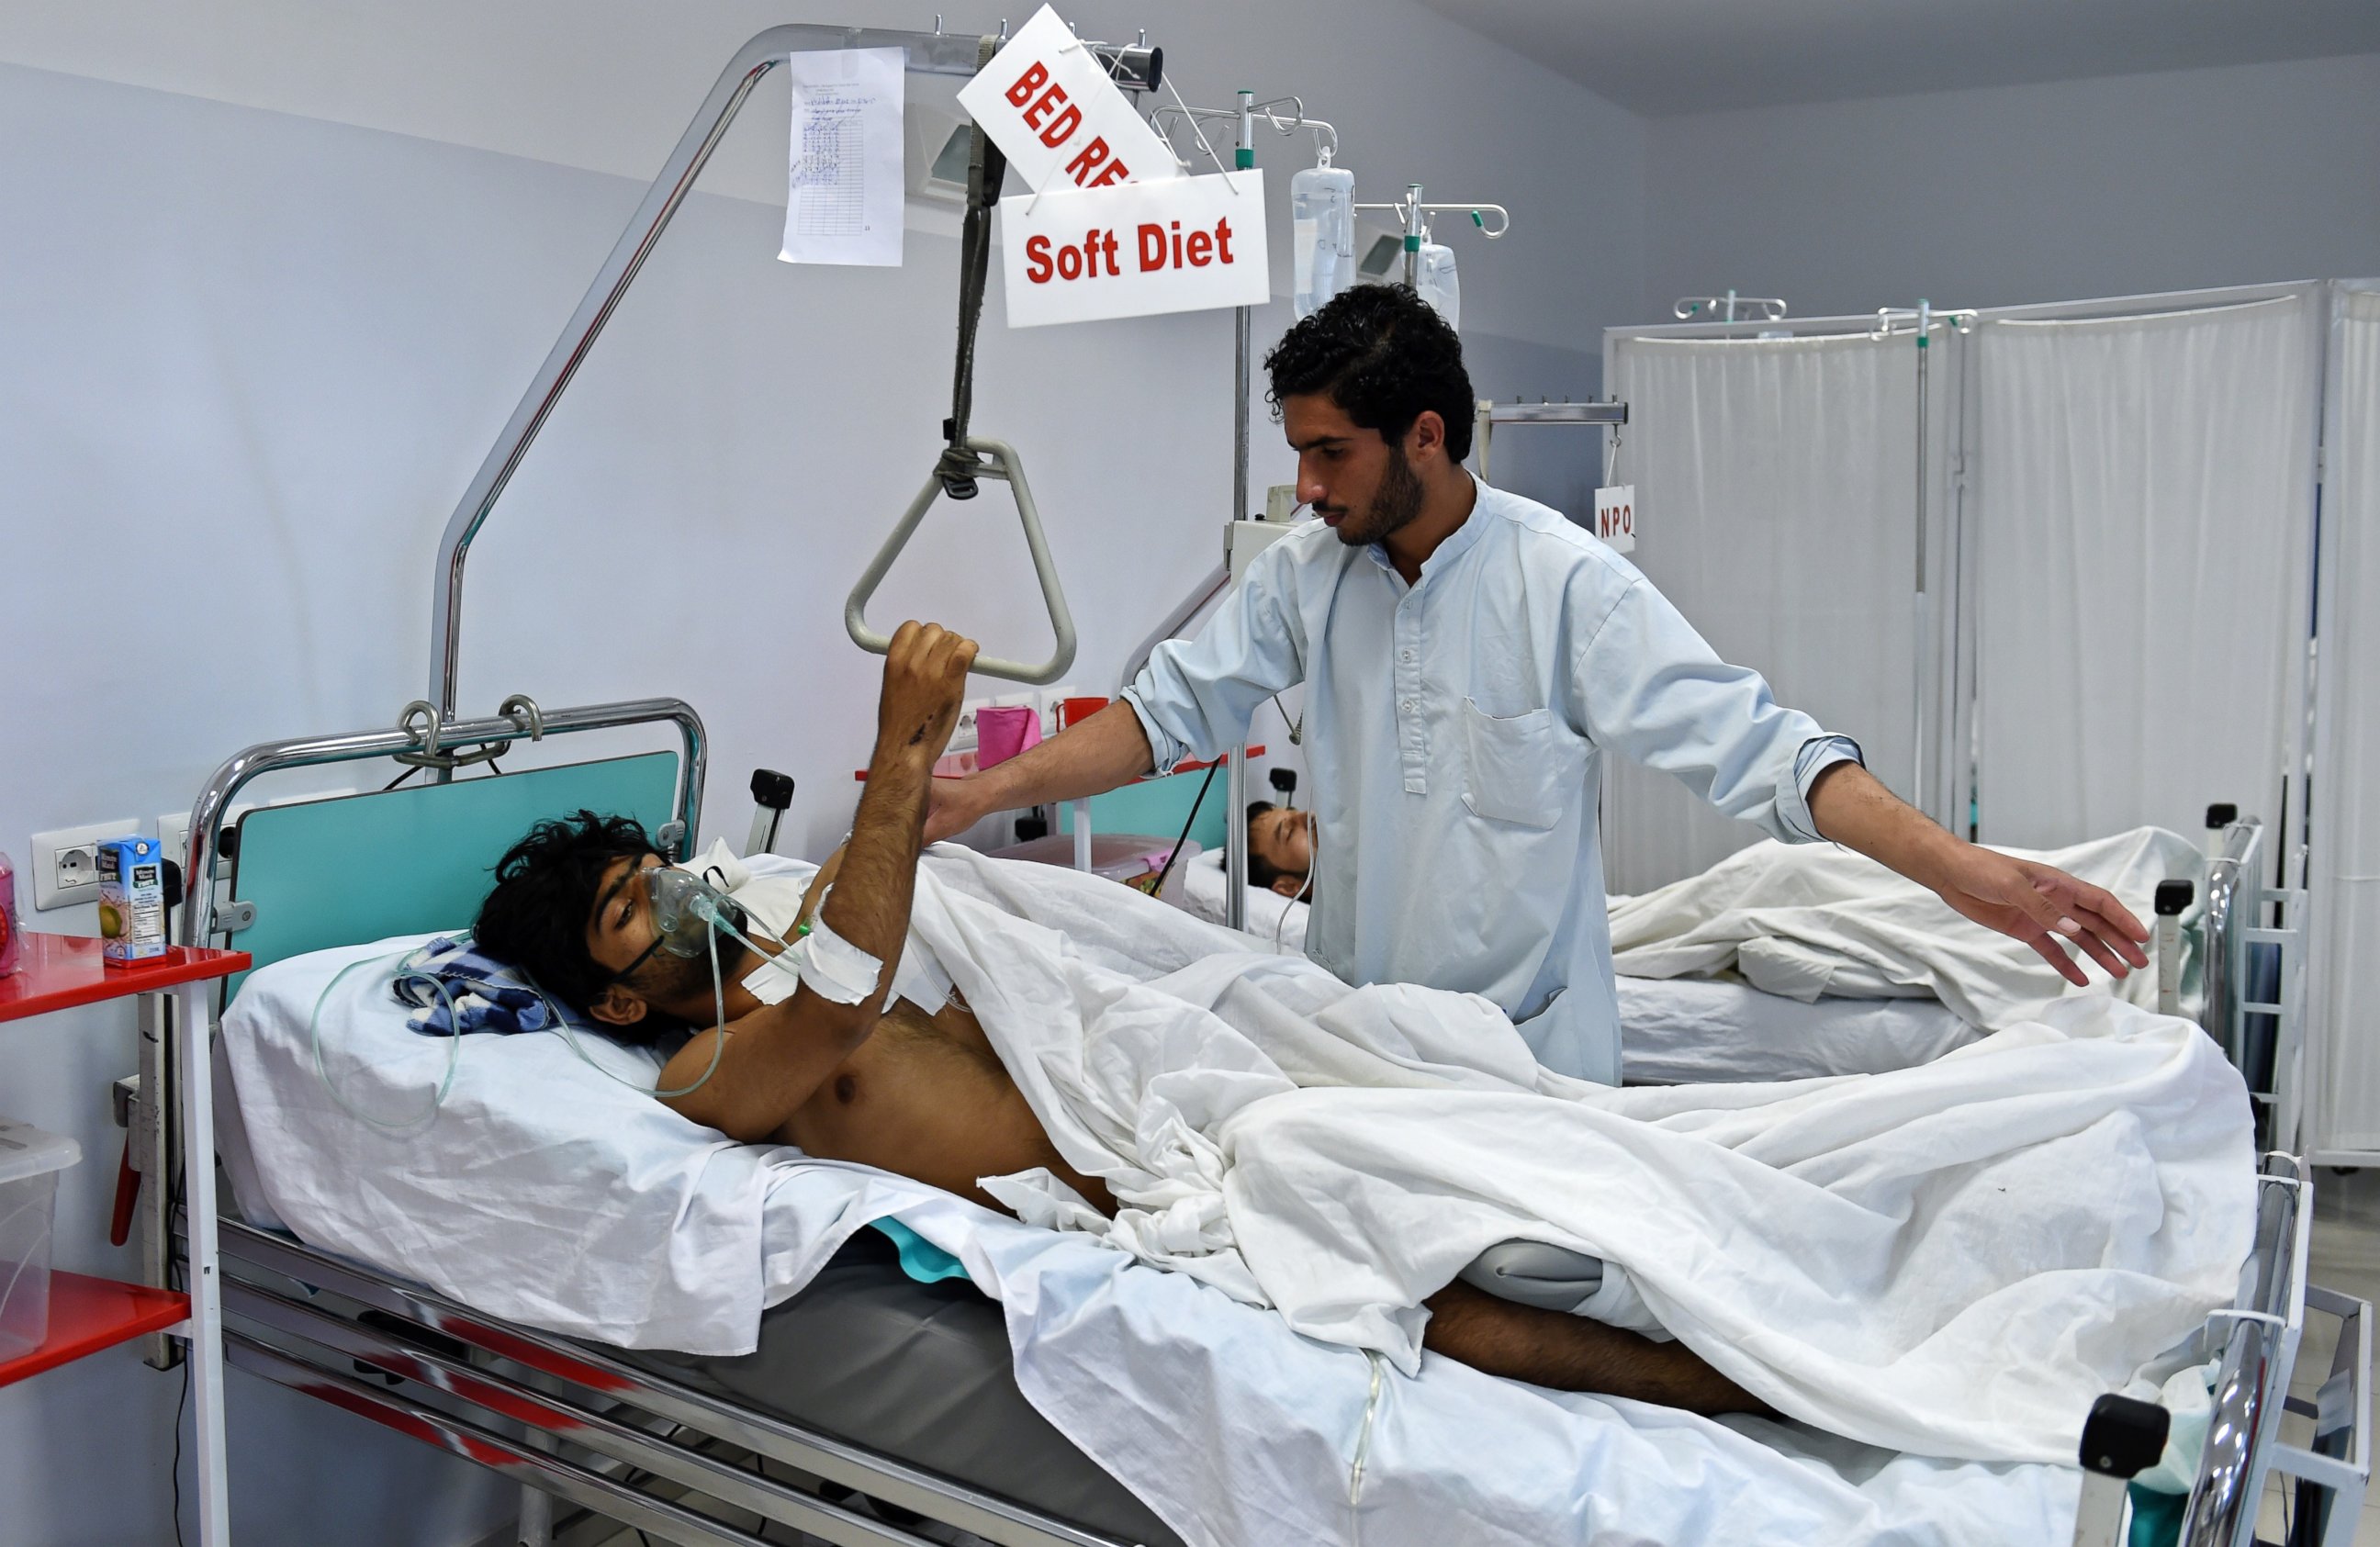 PHOTO: A wounded staff member of Doctors Without Borders who survived the bombing of the MSF Hospital in Kunduz receives treatment at an Italian aid organization's hospital in Kabul on Oct. 6, 2015. 